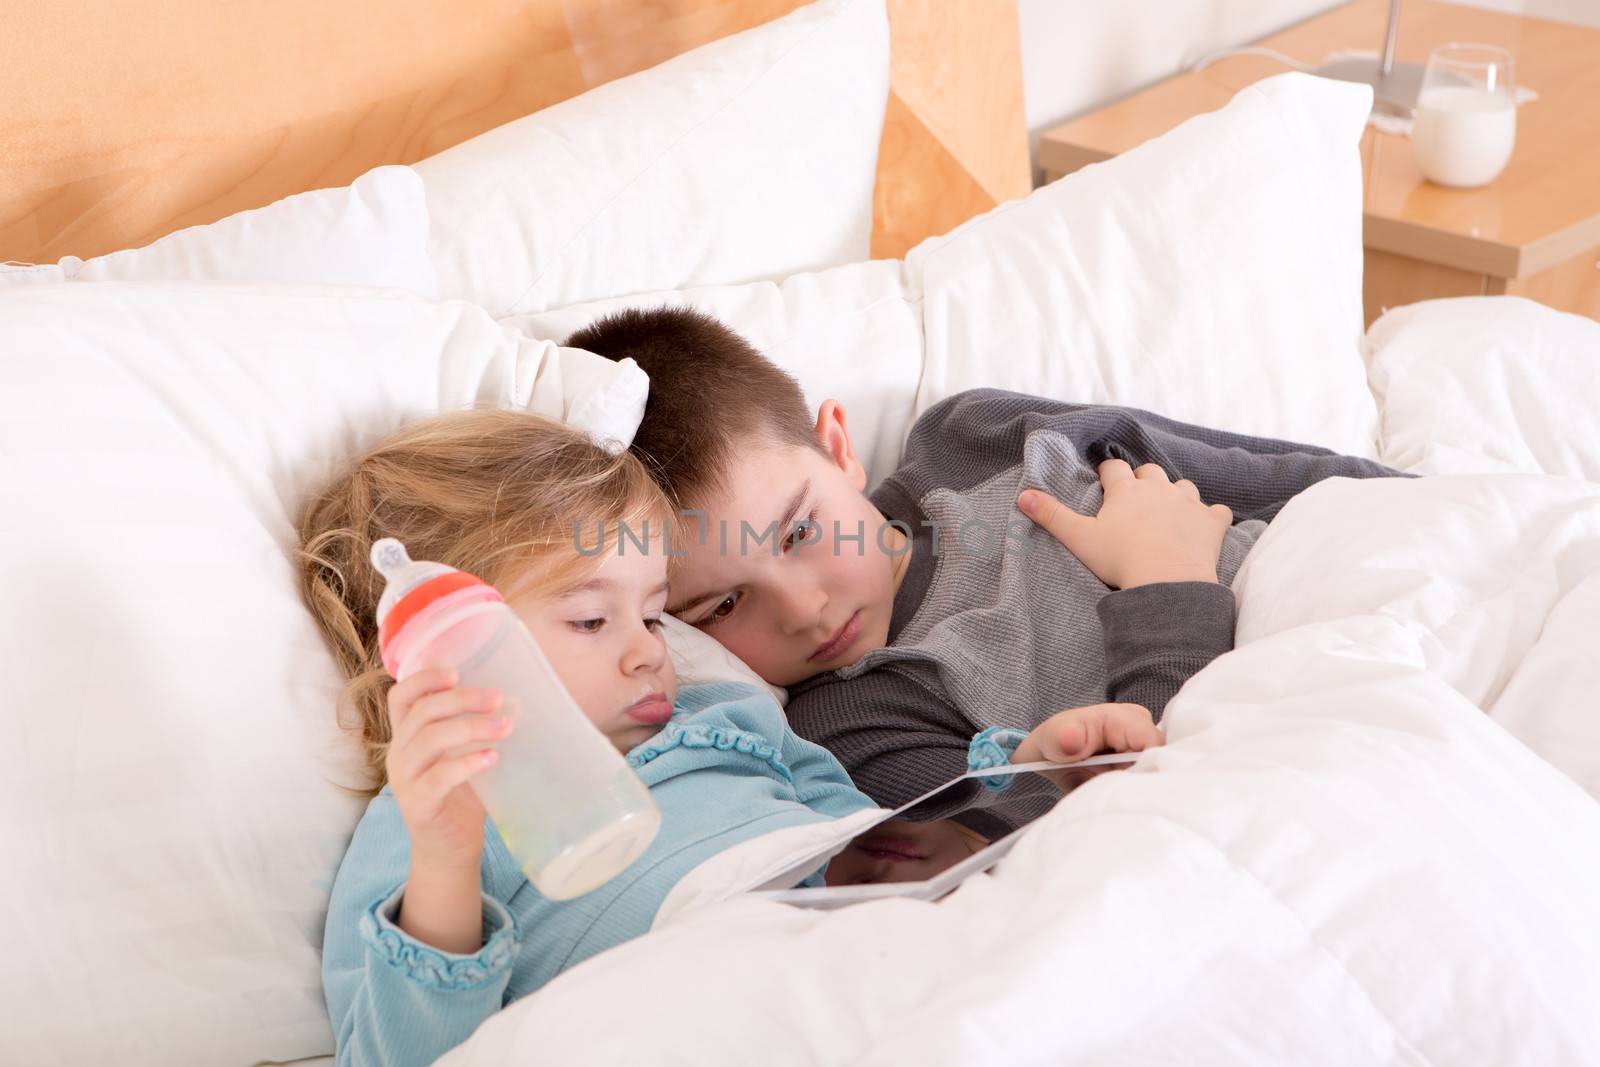 Tired little brother and sister going to sleep lying close together in a warm comfortable bed with a tablet computer on which they have just read a bedtime story